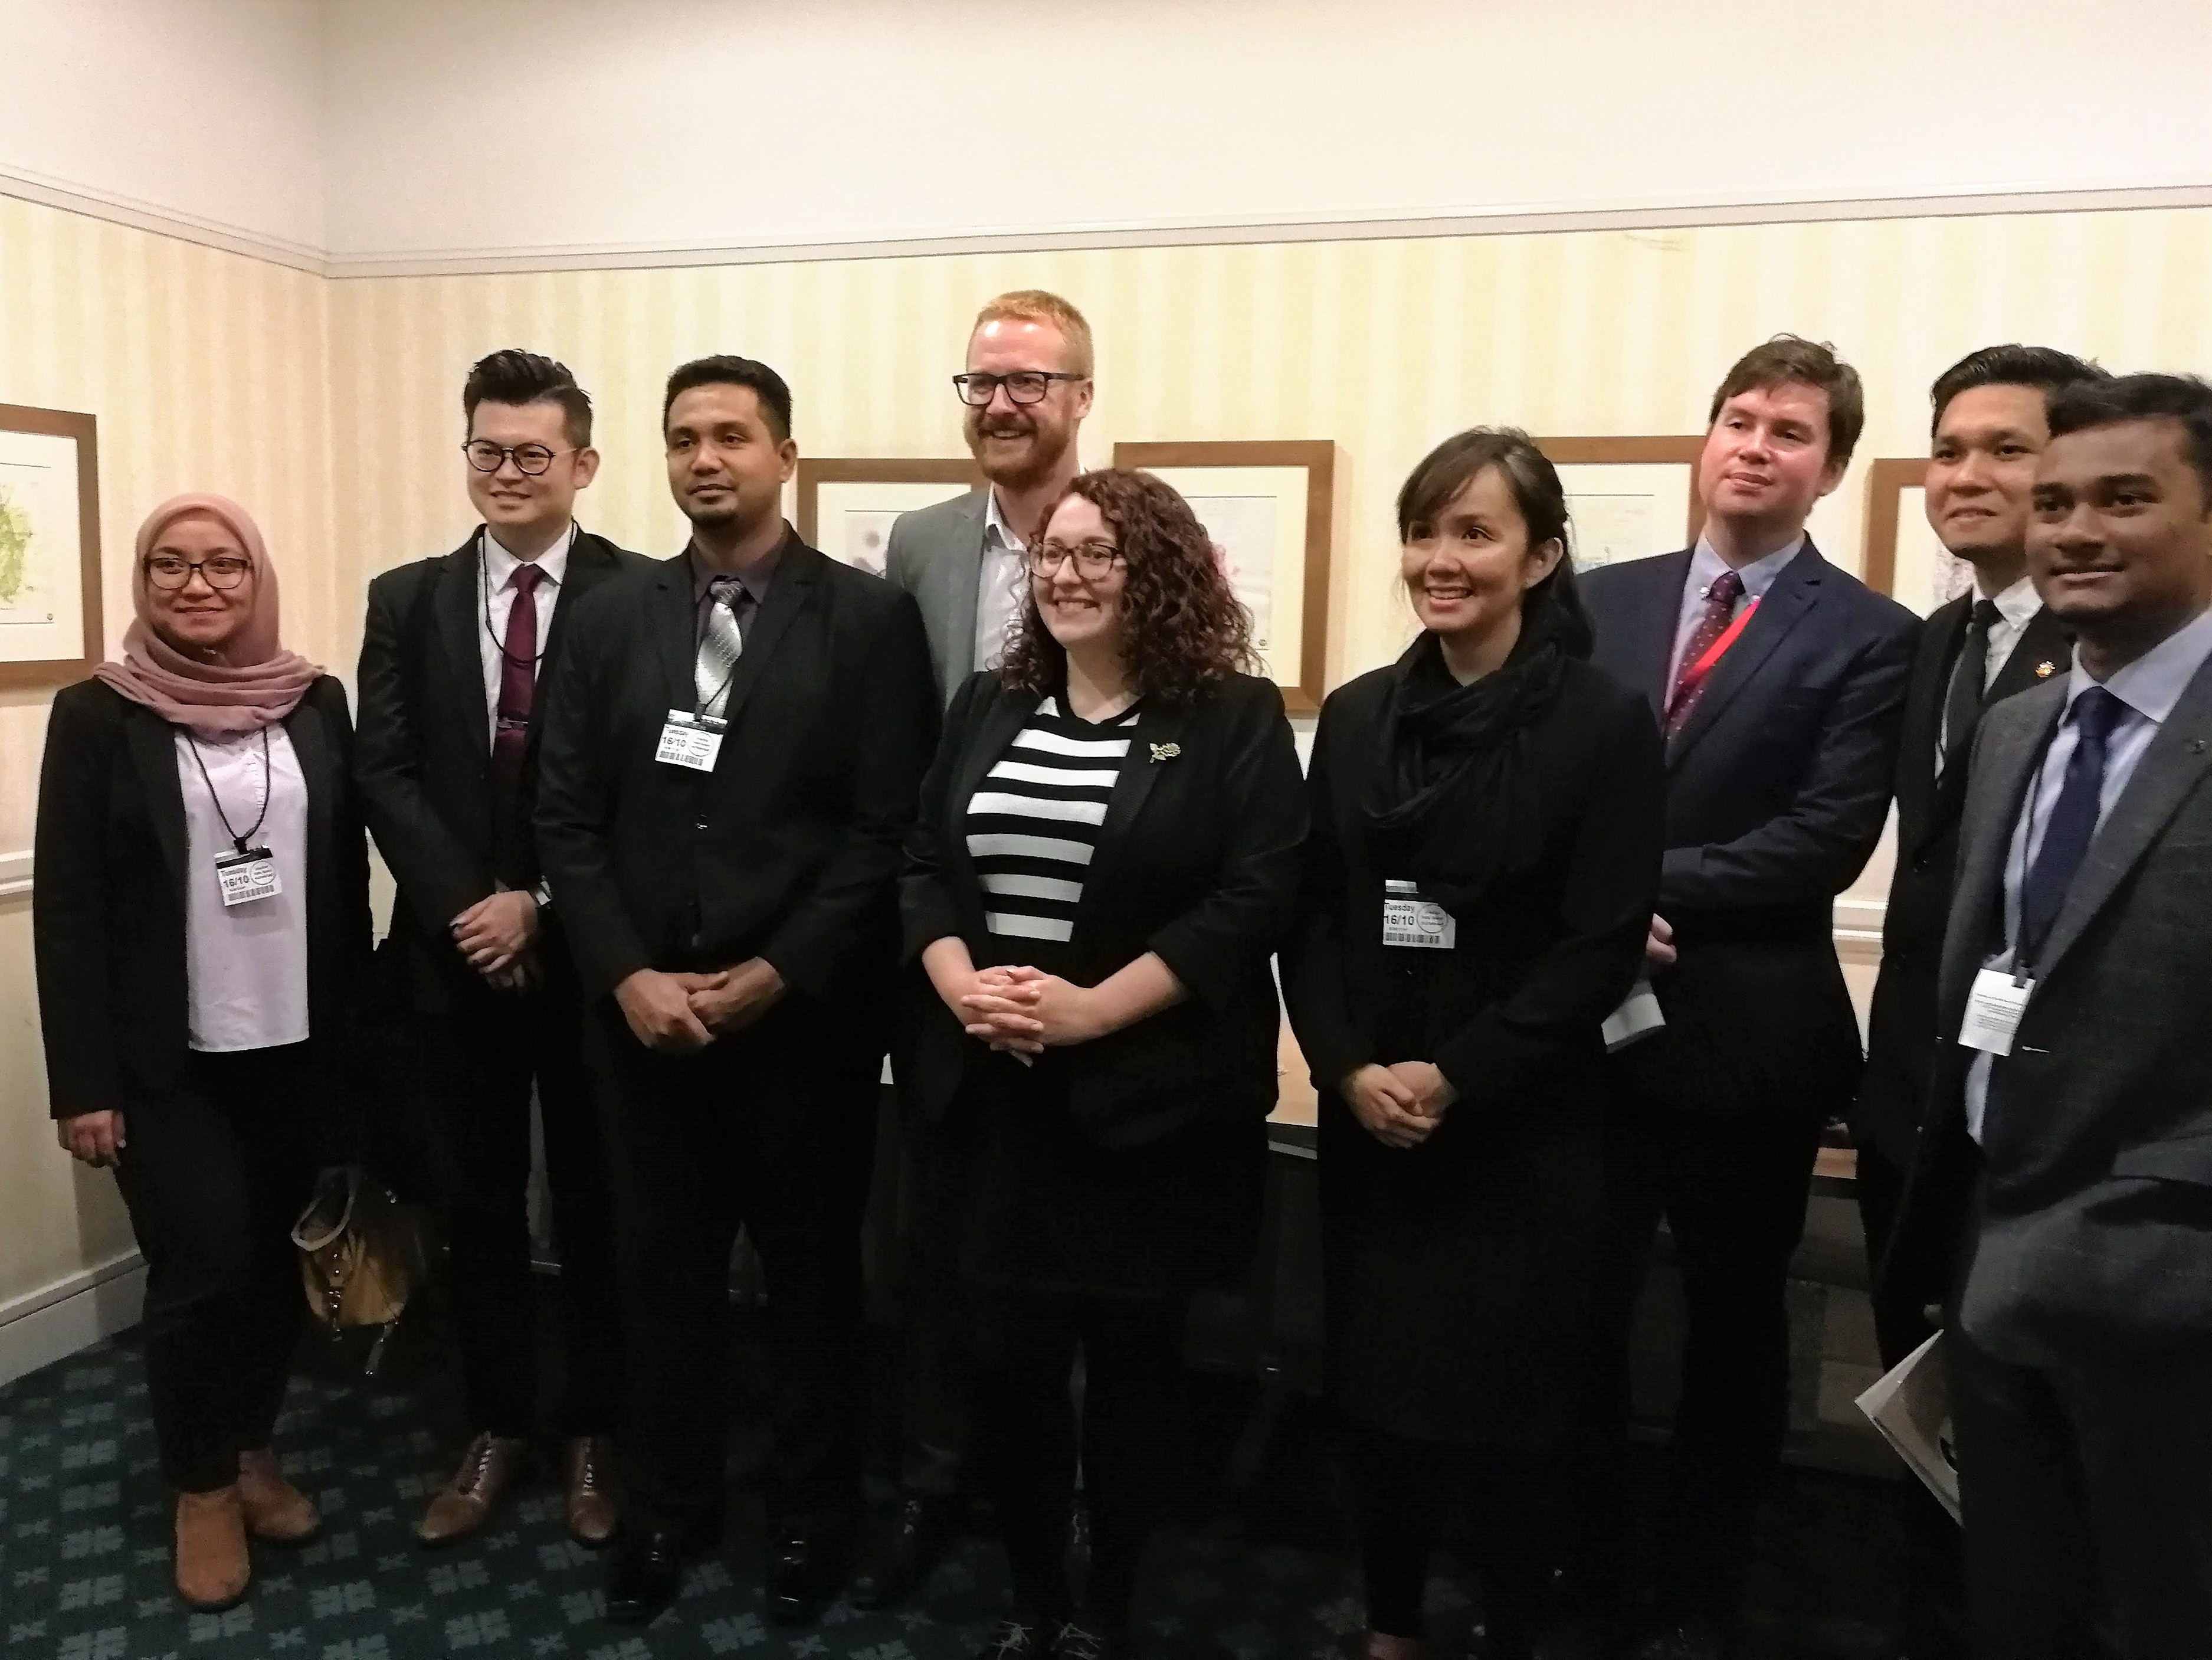 Lloyd Russell-Moyle MP, Danielle Rowley MP, Dan Carden MP with the delegation following a roundtable discussion